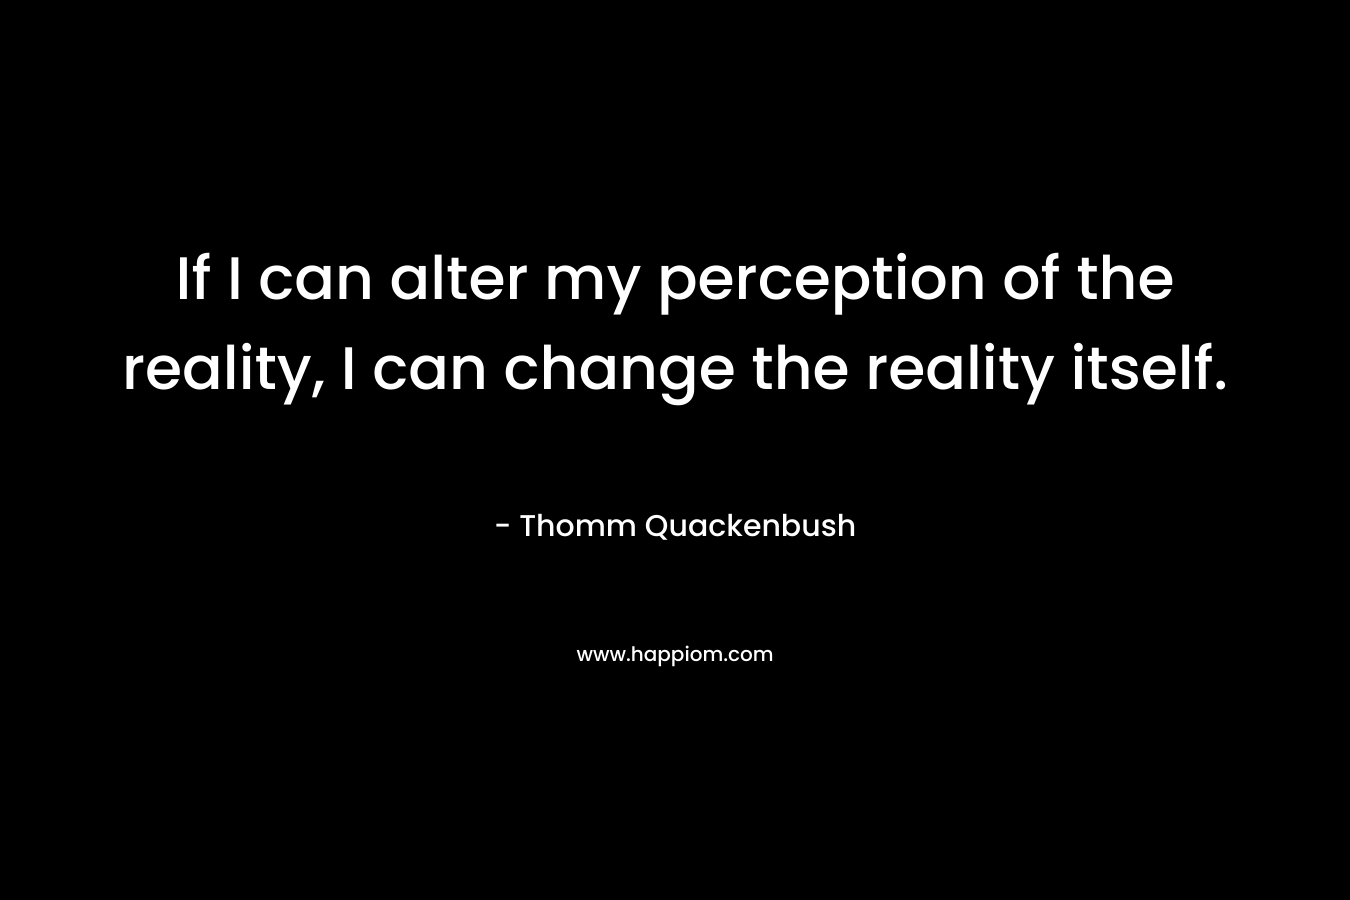 If I can alter my perception of the reality, I can change the reality itself.